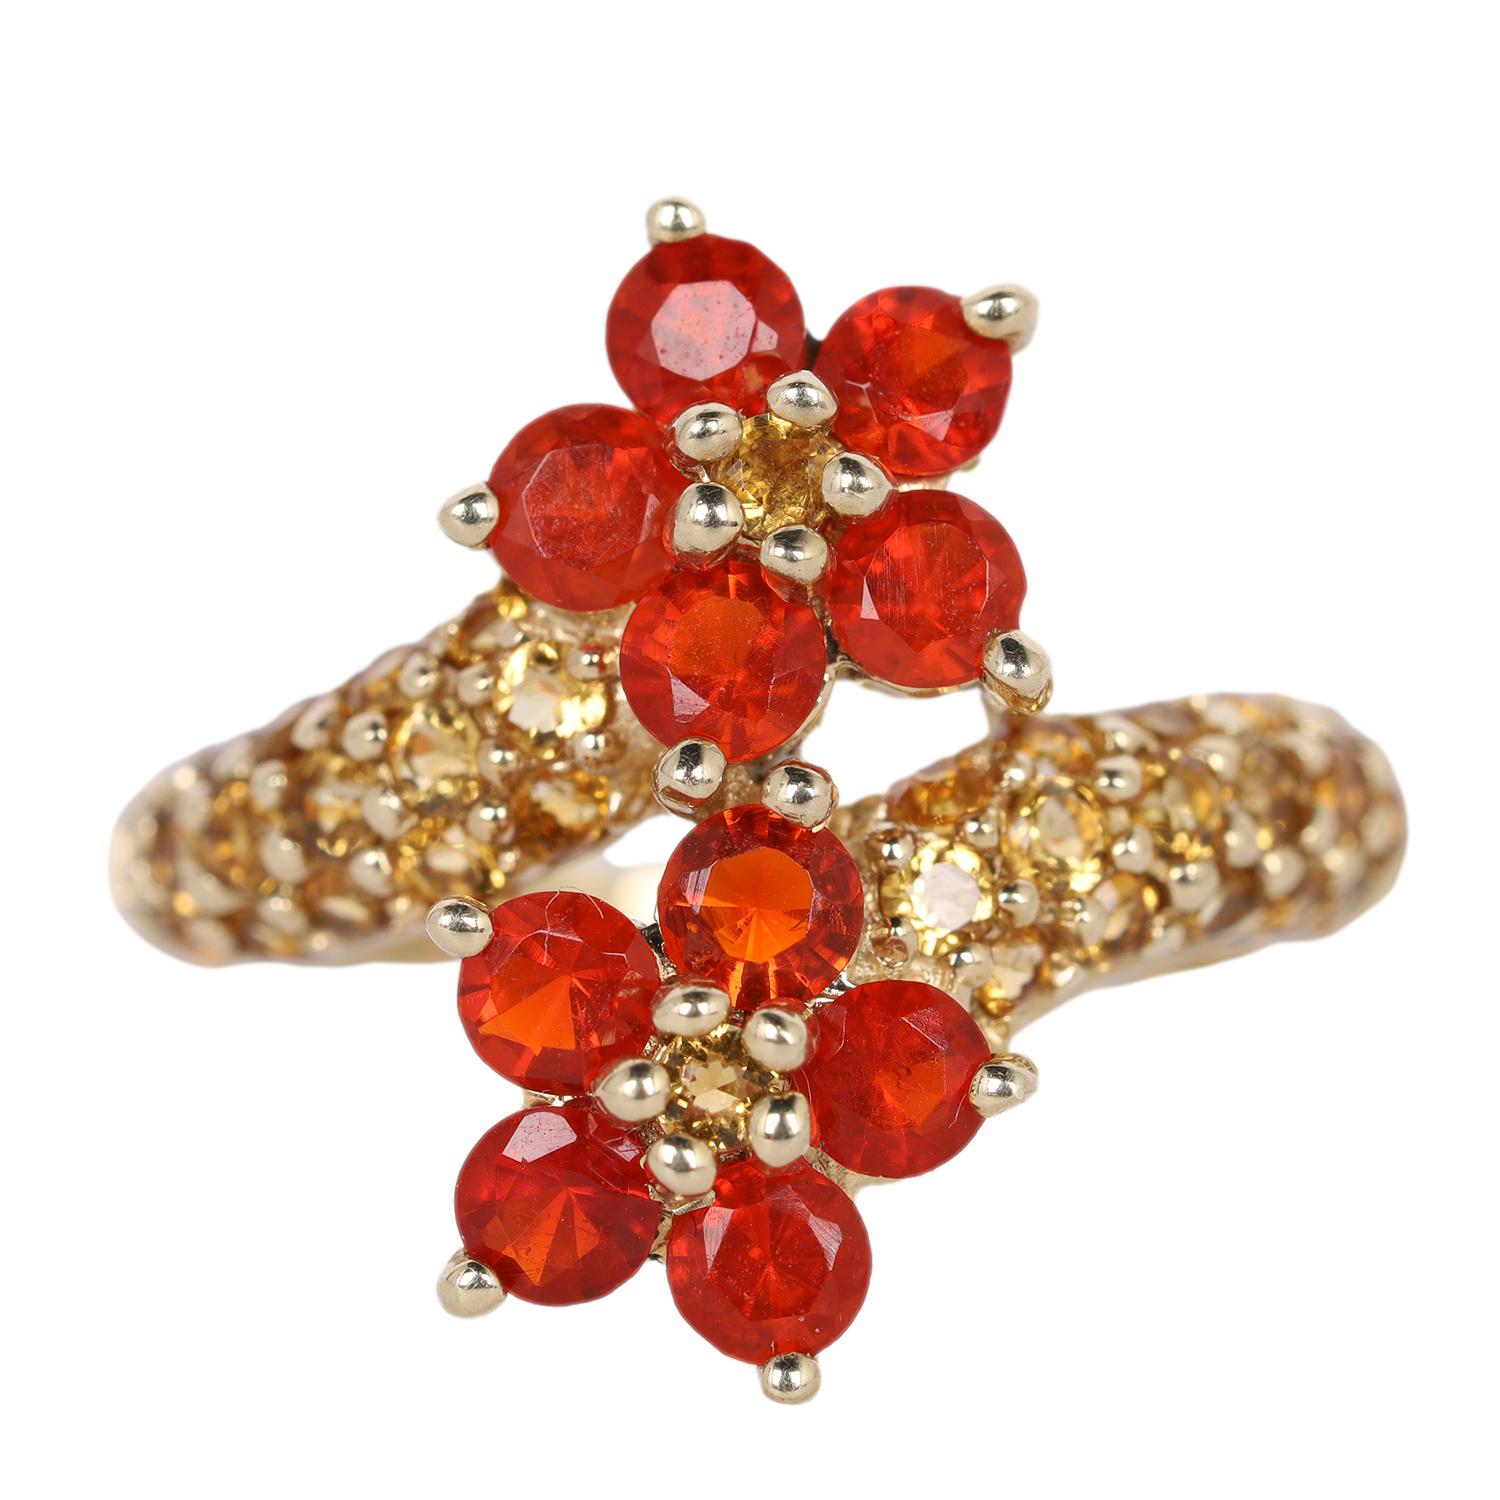 10Kt Yellow Gold Mexican Fire Opal and Citrine Double Flower Ring Size 6

The ring features 10 total Mexican fire opals, arranged in two flower settings. Each opal measures approximately 3mm in diameter. Along with these, there are 26 total round